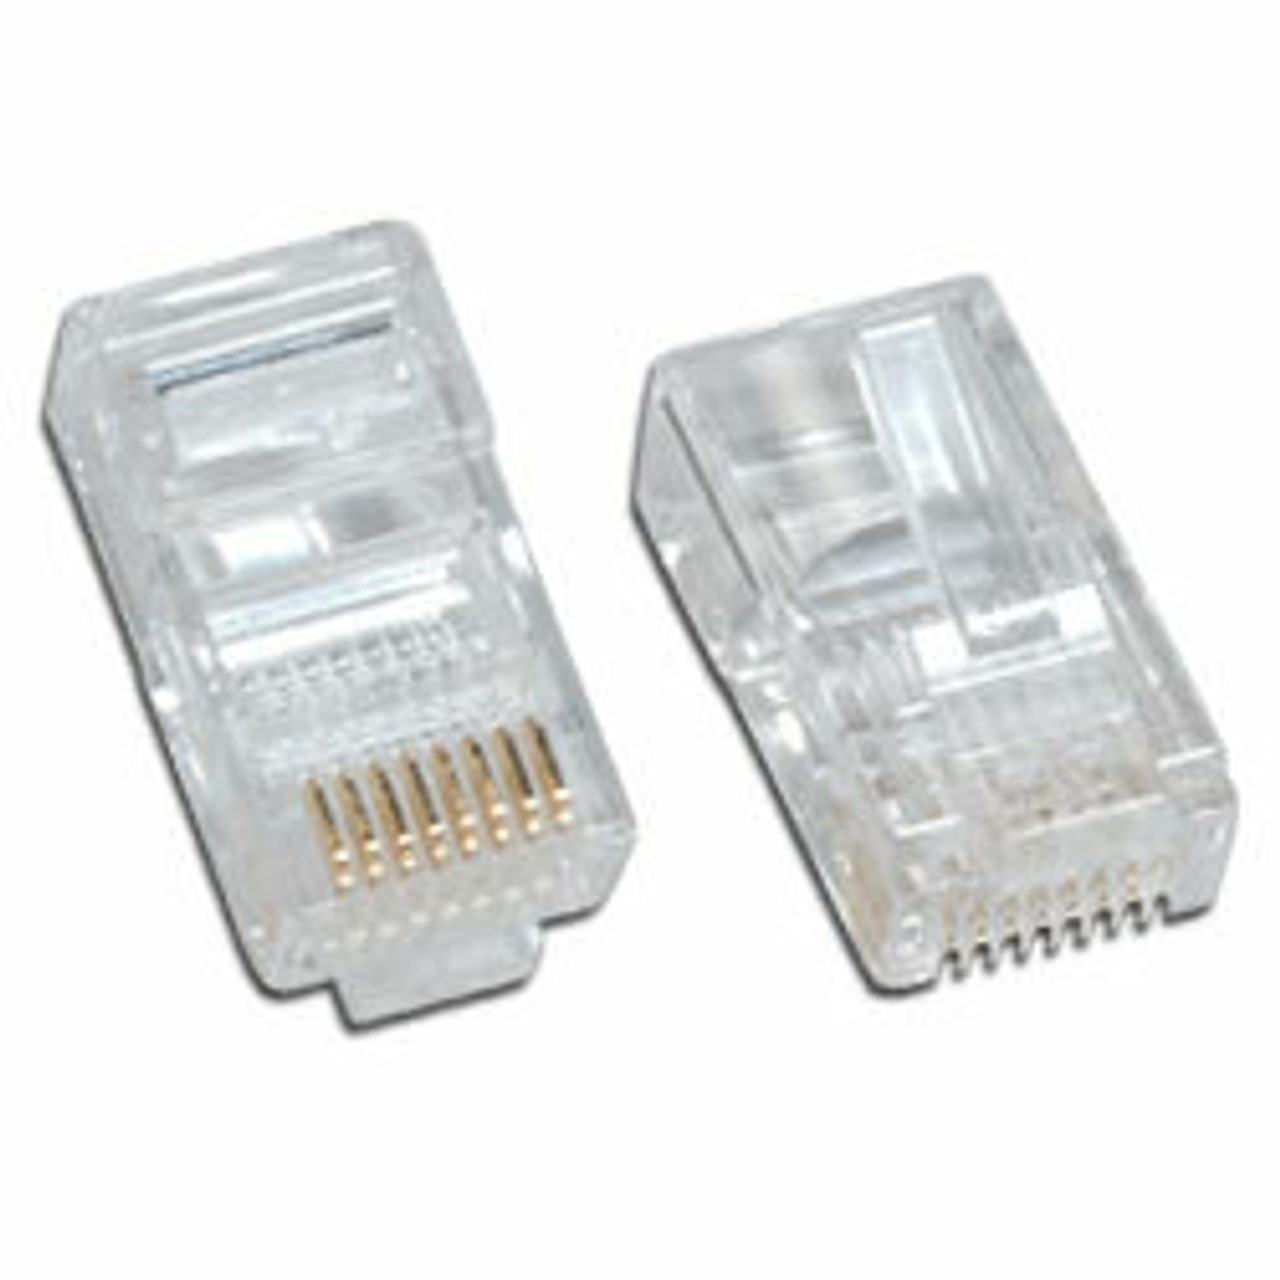 Network Cables Ends (RJ45 Modular Plugs)